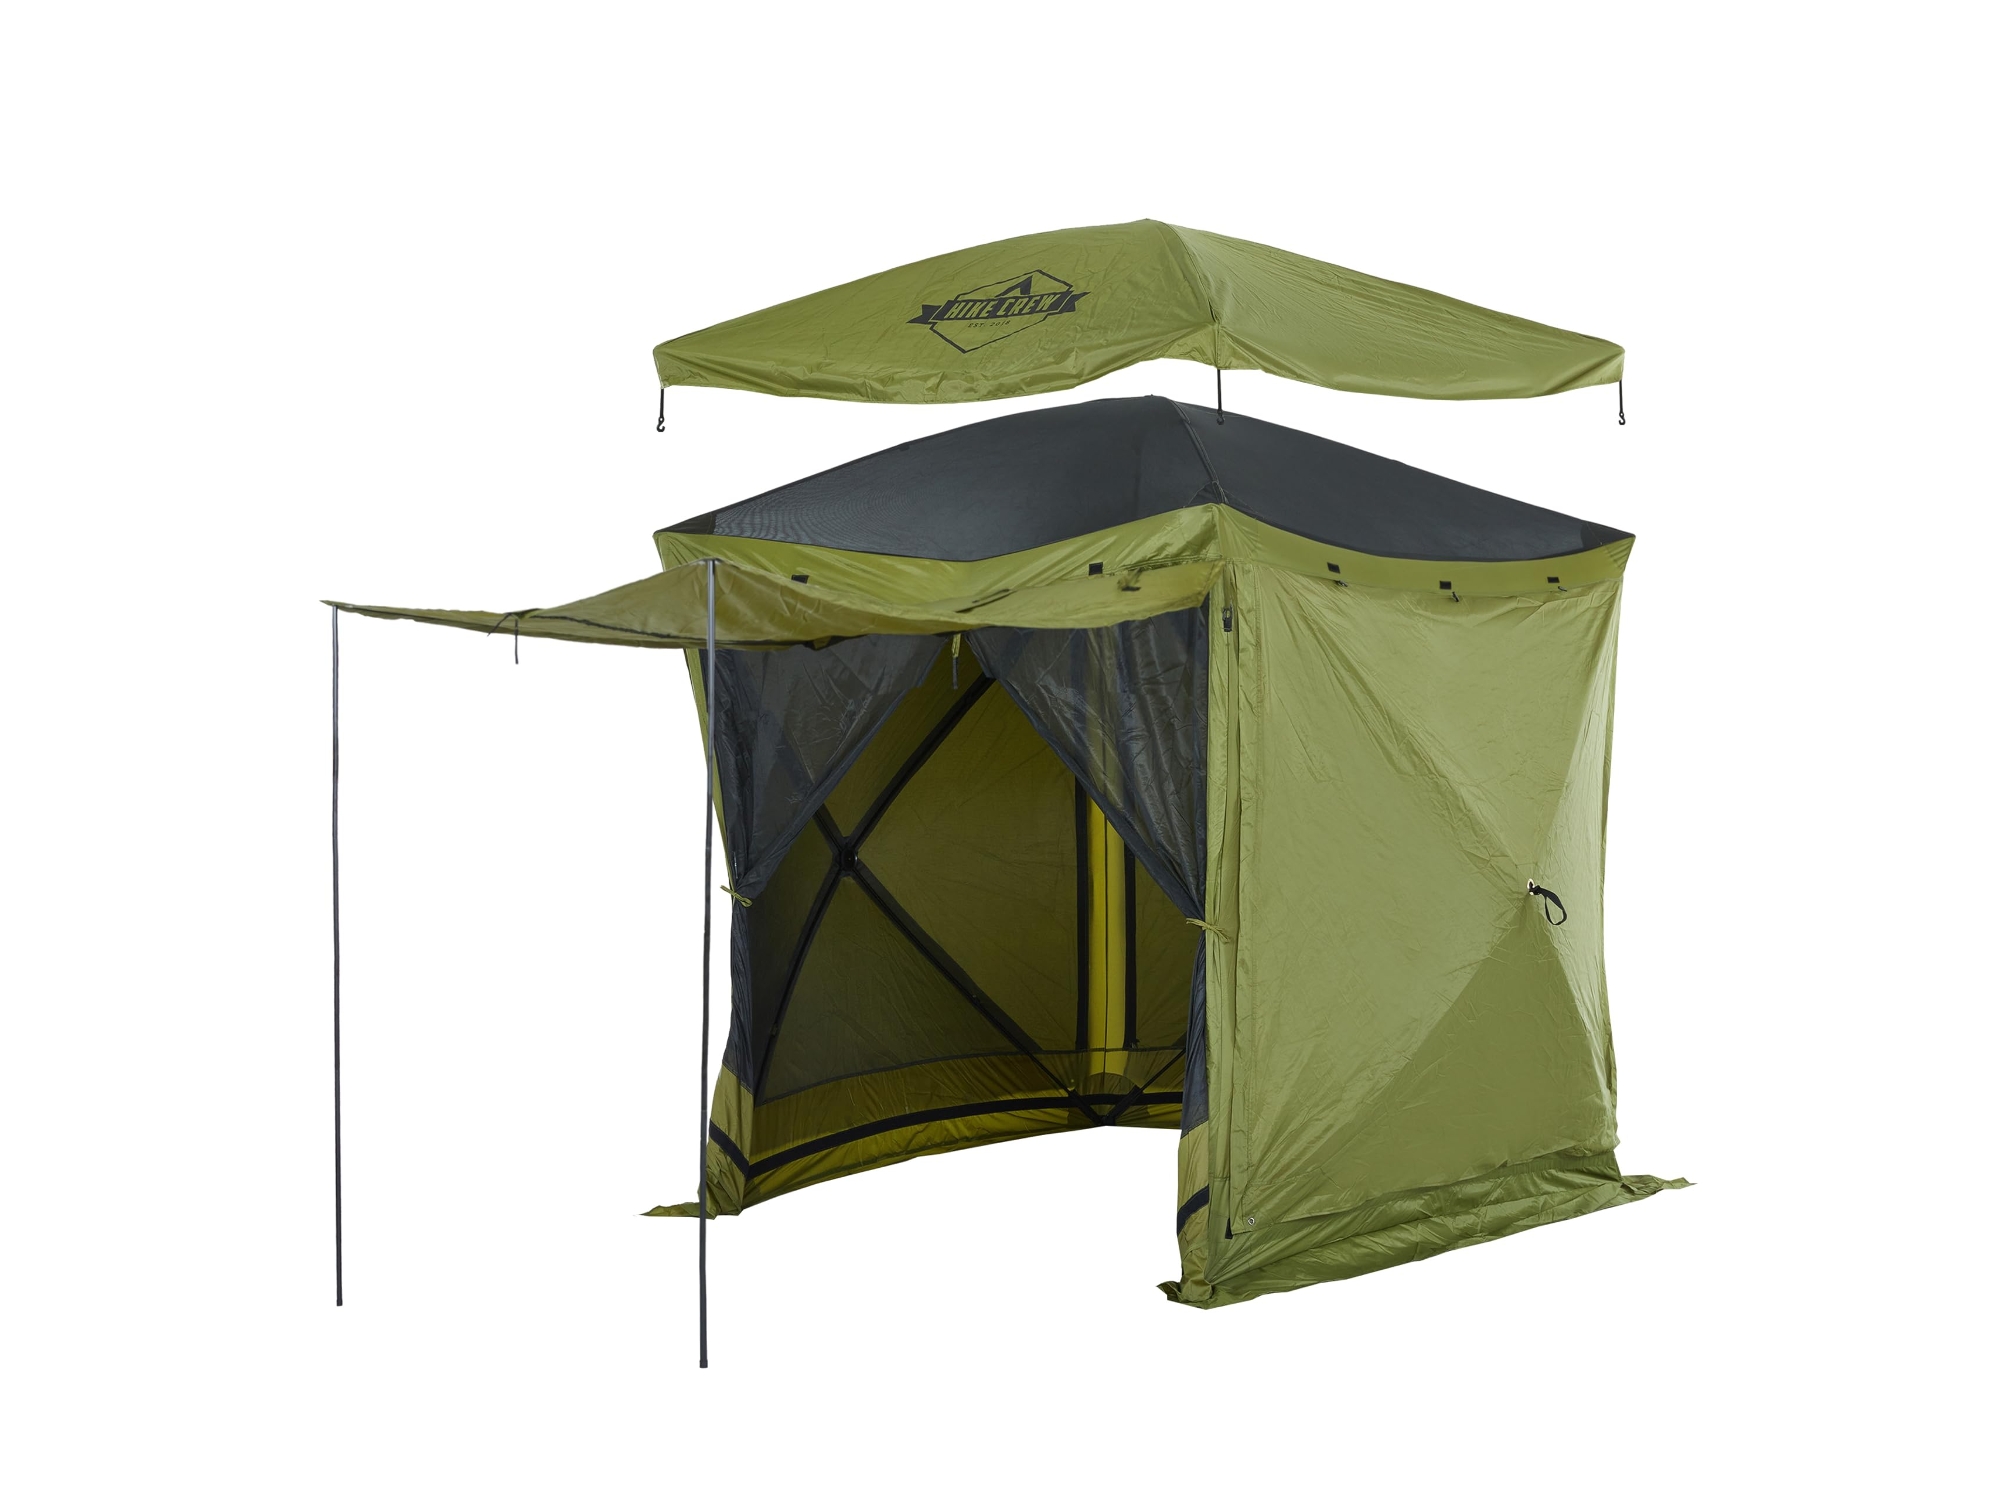 Hike Crew 6.5 x 6.5 Gazebo Tent, Outdoor Tent Canopy with Roof, Green